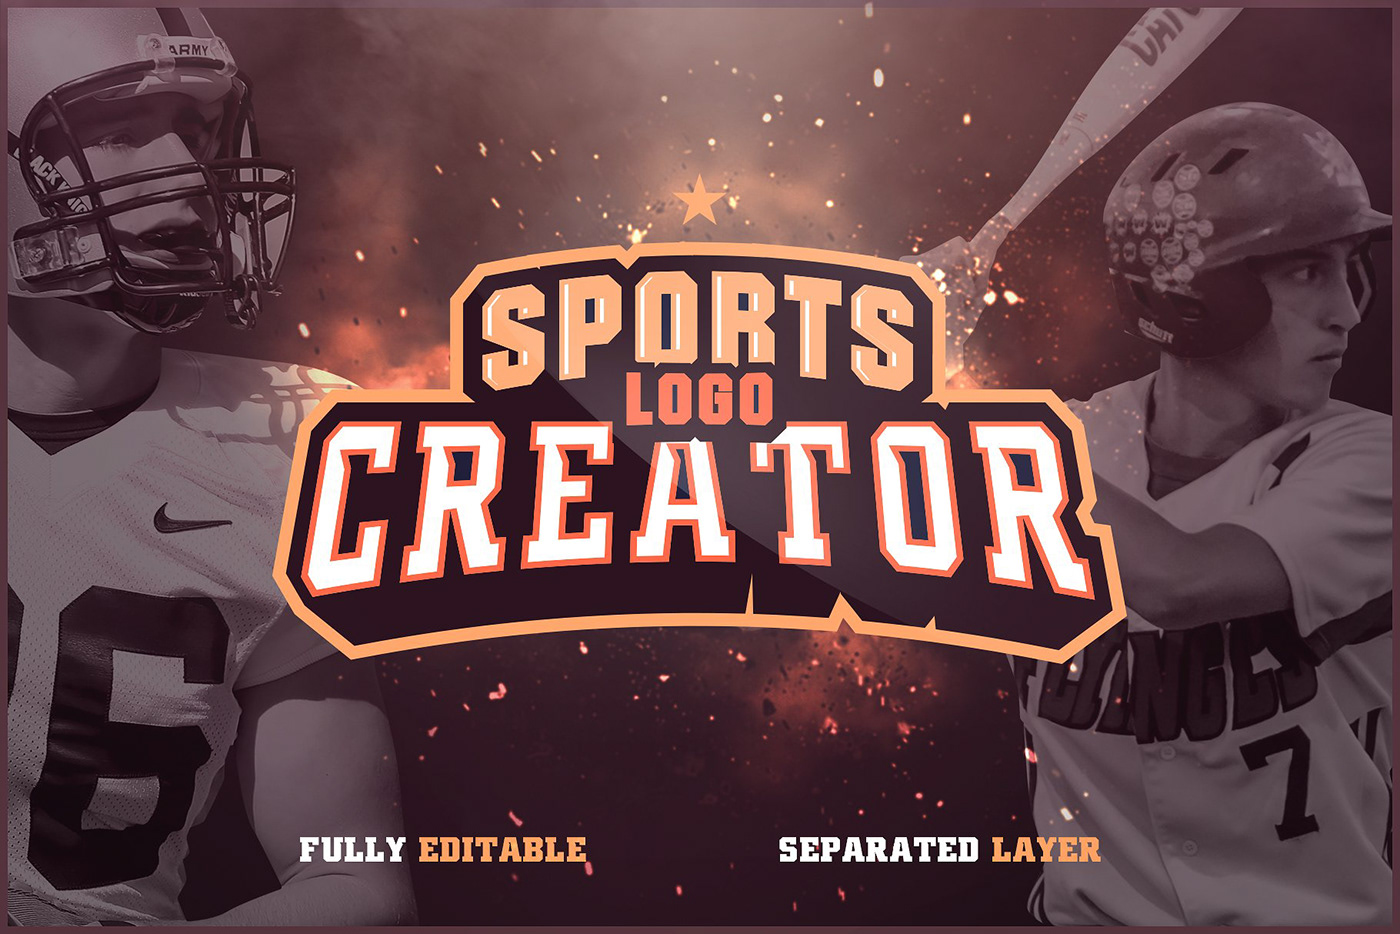 You need to do sports. Sport creator.